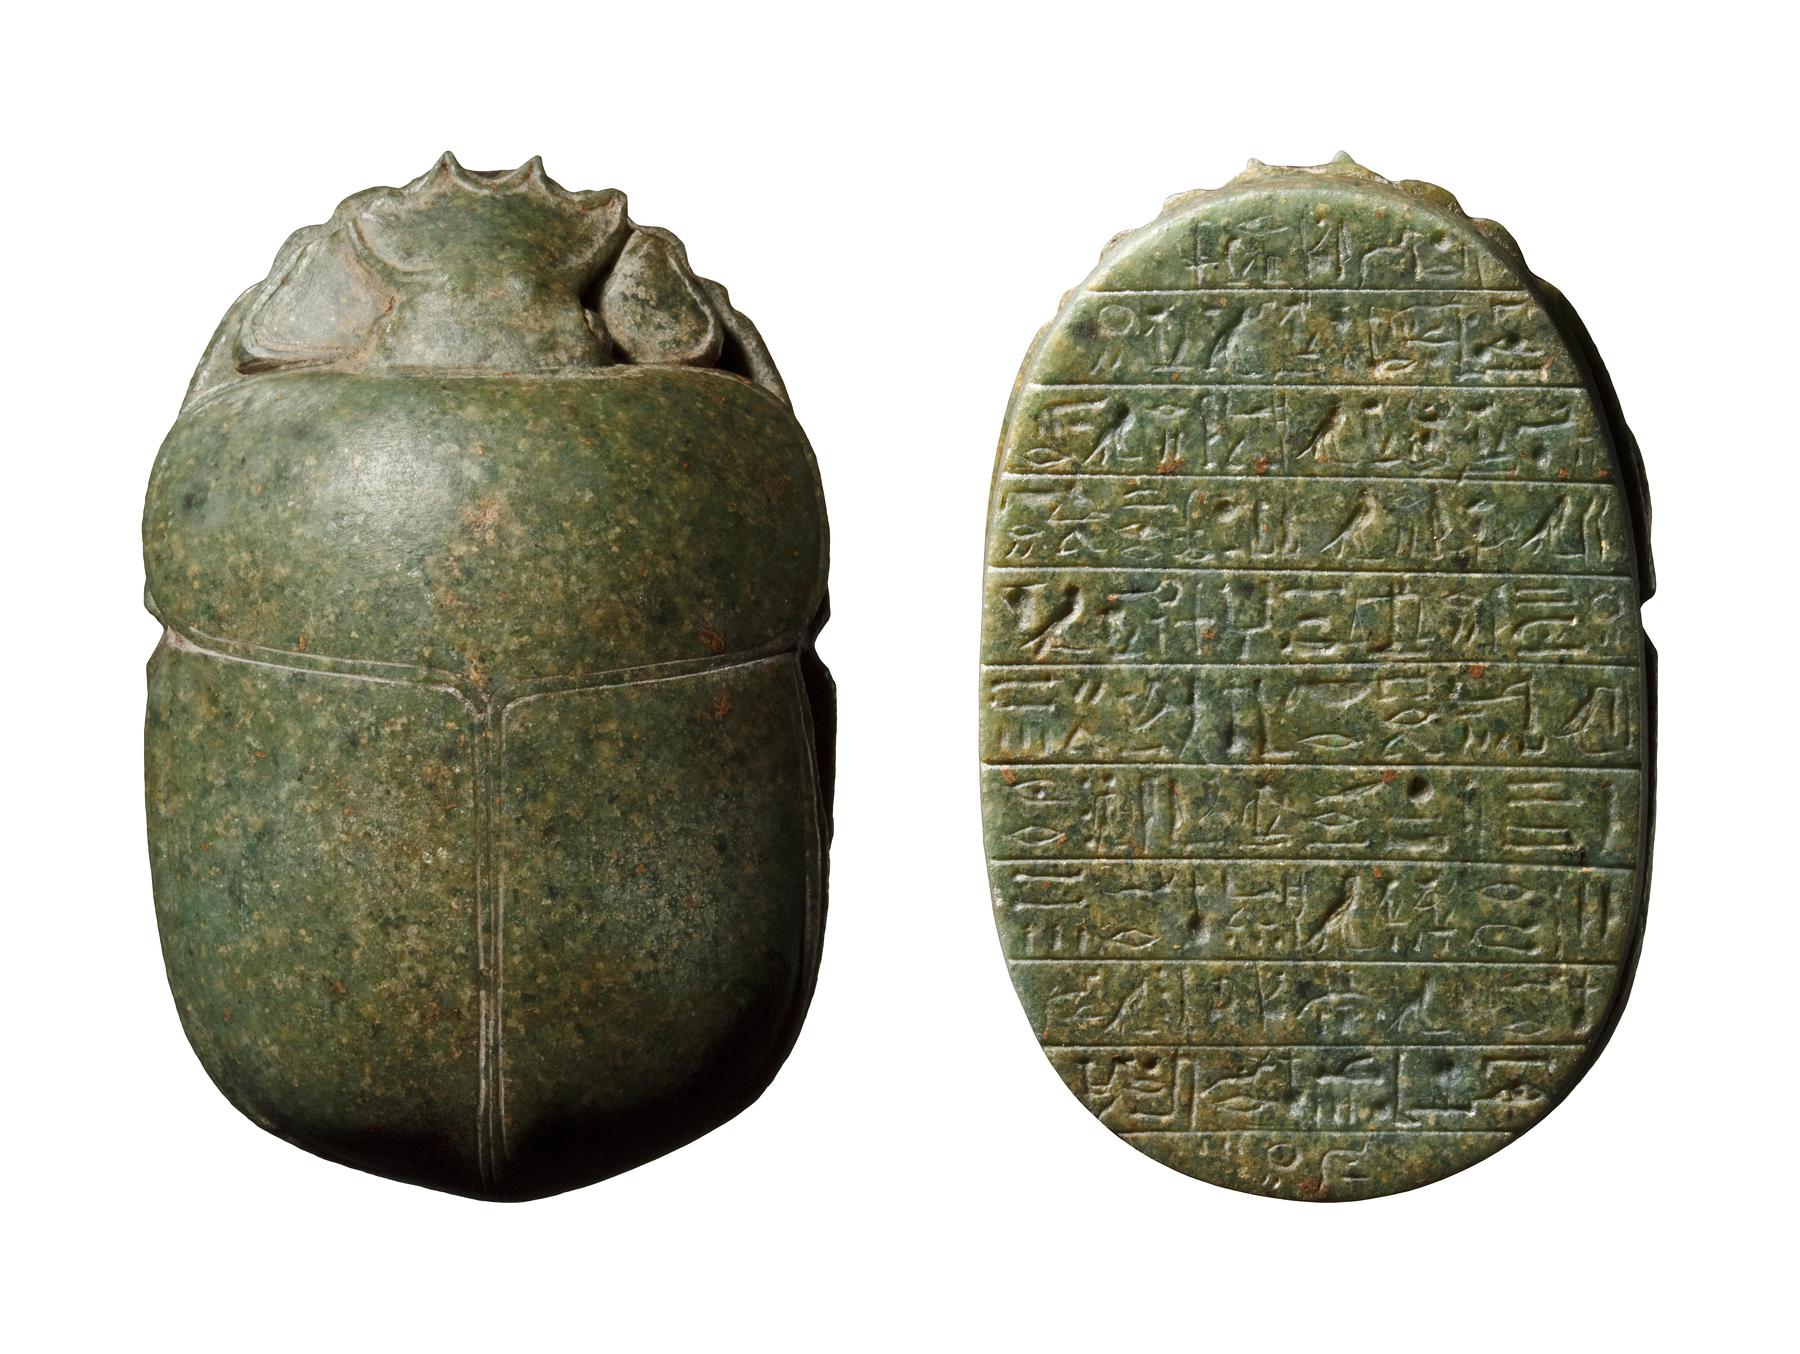 Scarab with hieroglyphic inscription from The Book of the Dead, H403